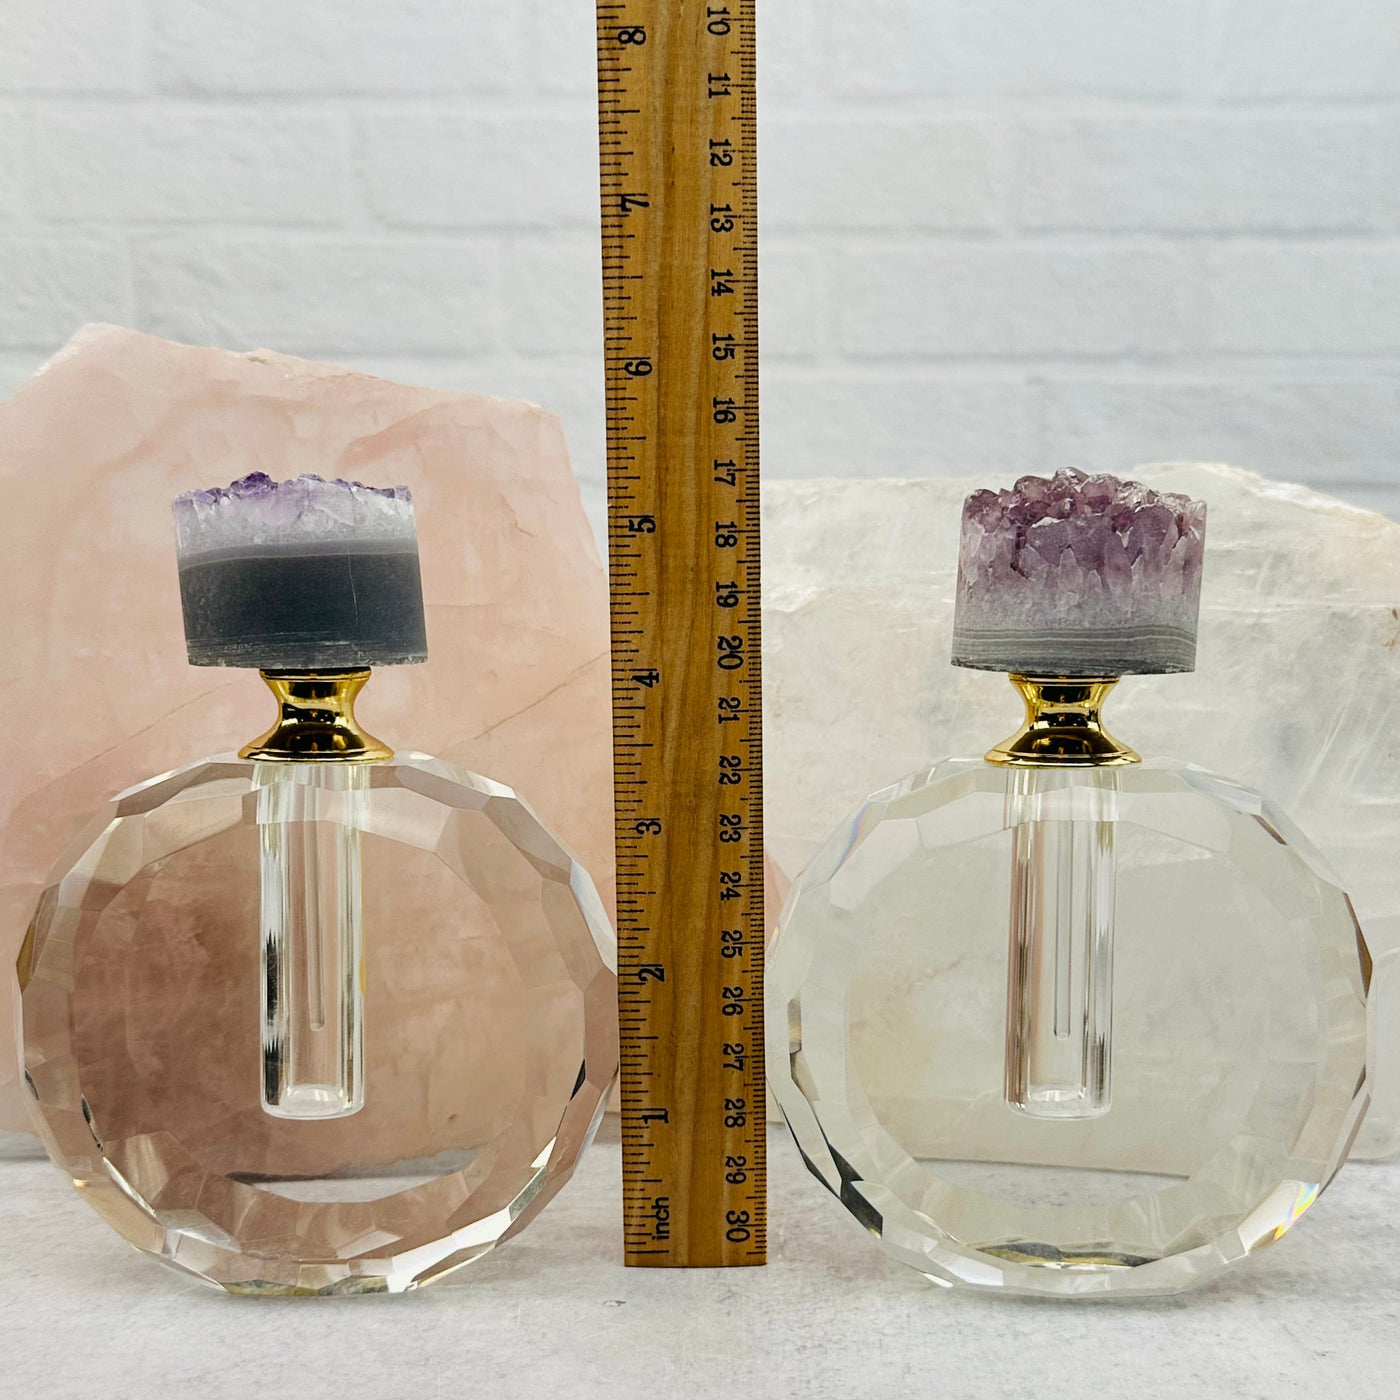 perfume bottles displayed next to a ruler for size reference 